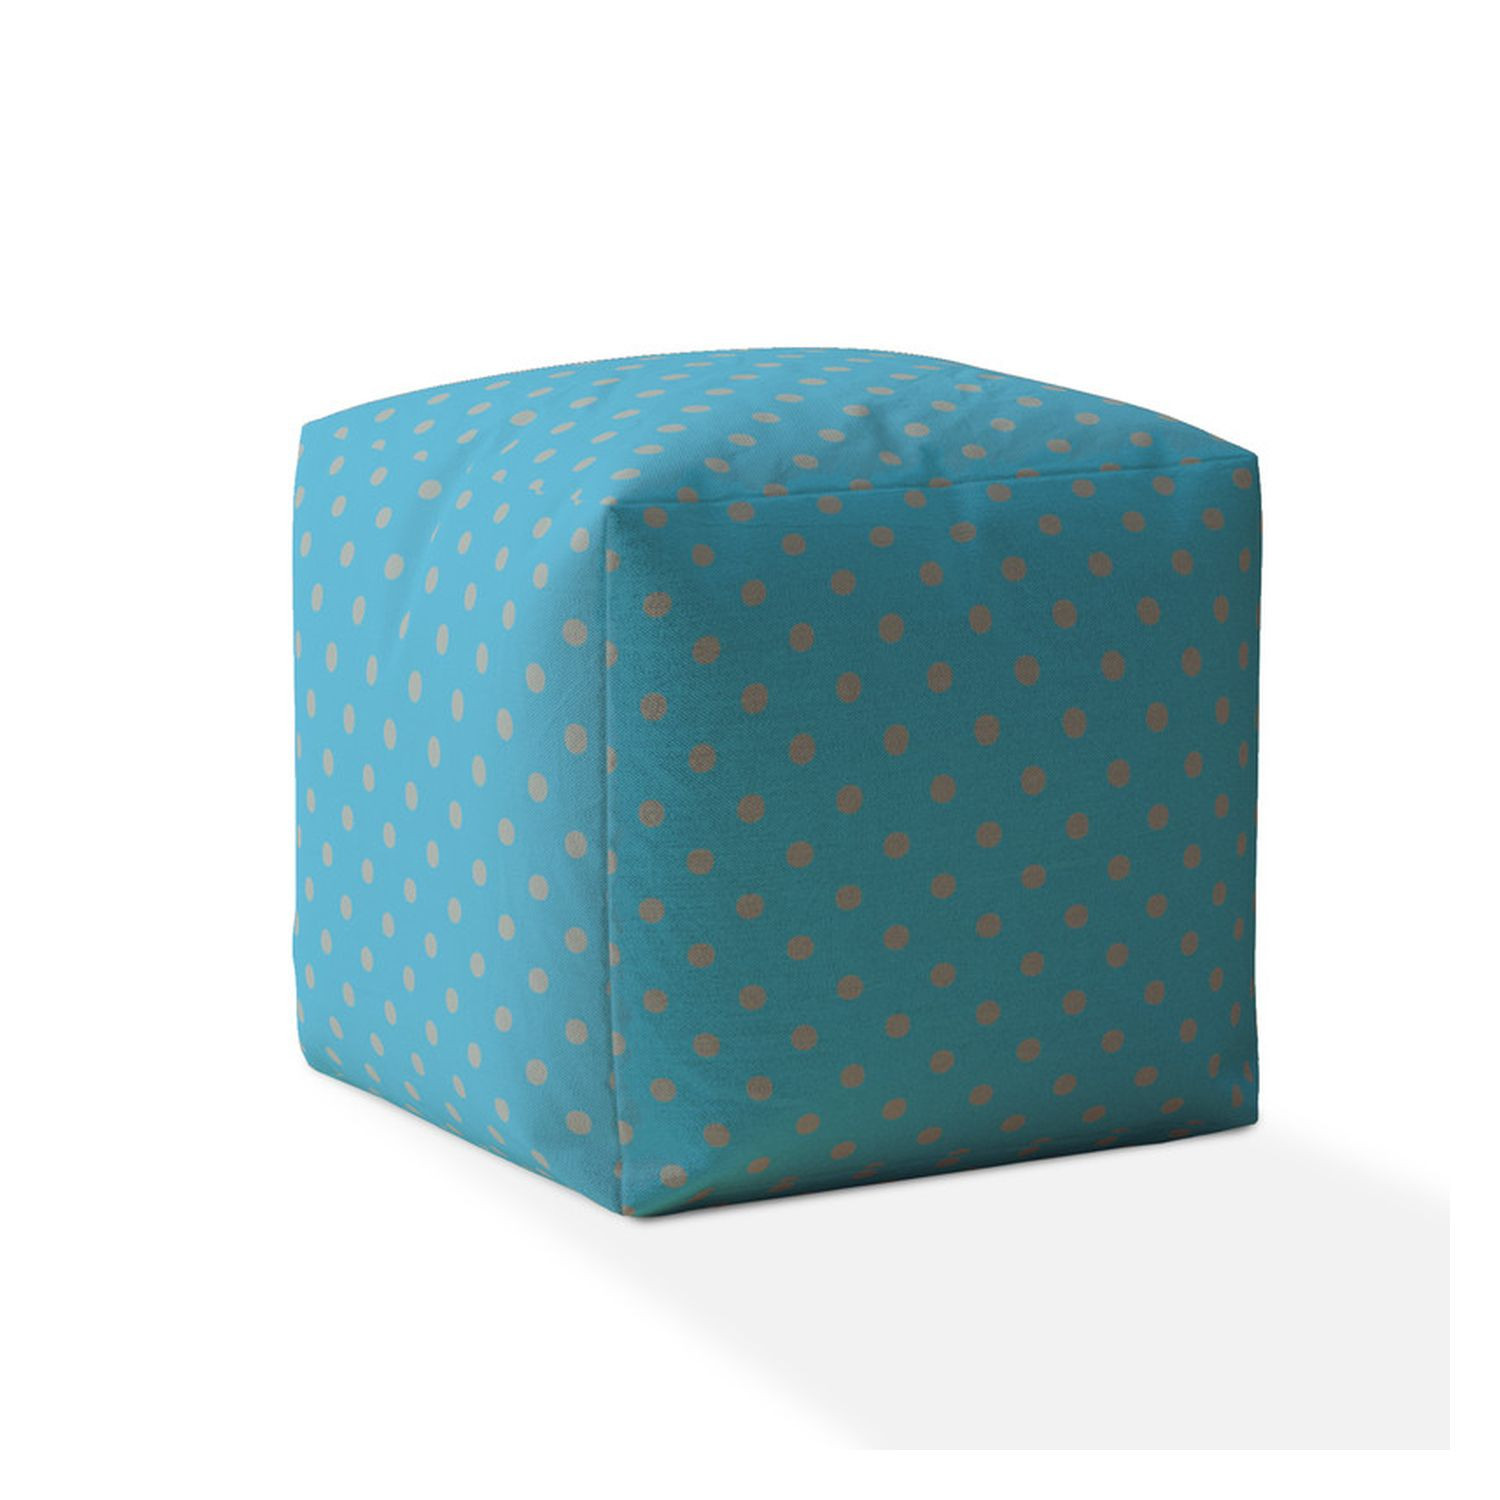 17" Blue And Gray Cotton Polka Dots Pouf Cover-518515-1